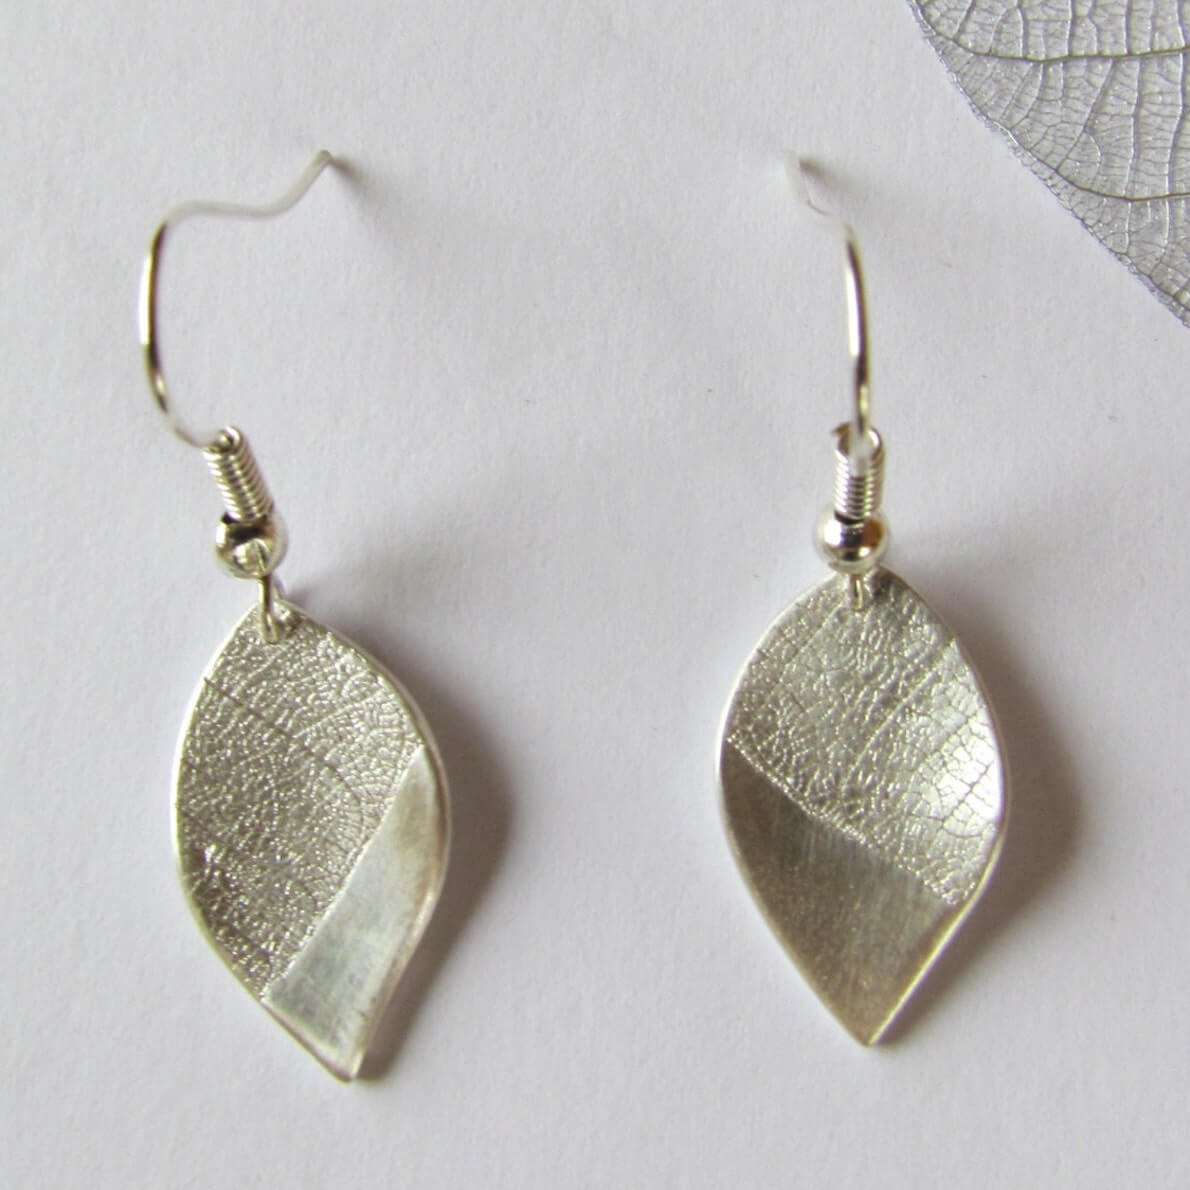 Image of Curved Silver Leaf Earrings by Silverlines, designed, produced or made in the UK. Buying this product supports a UK business, jobs and the local community.